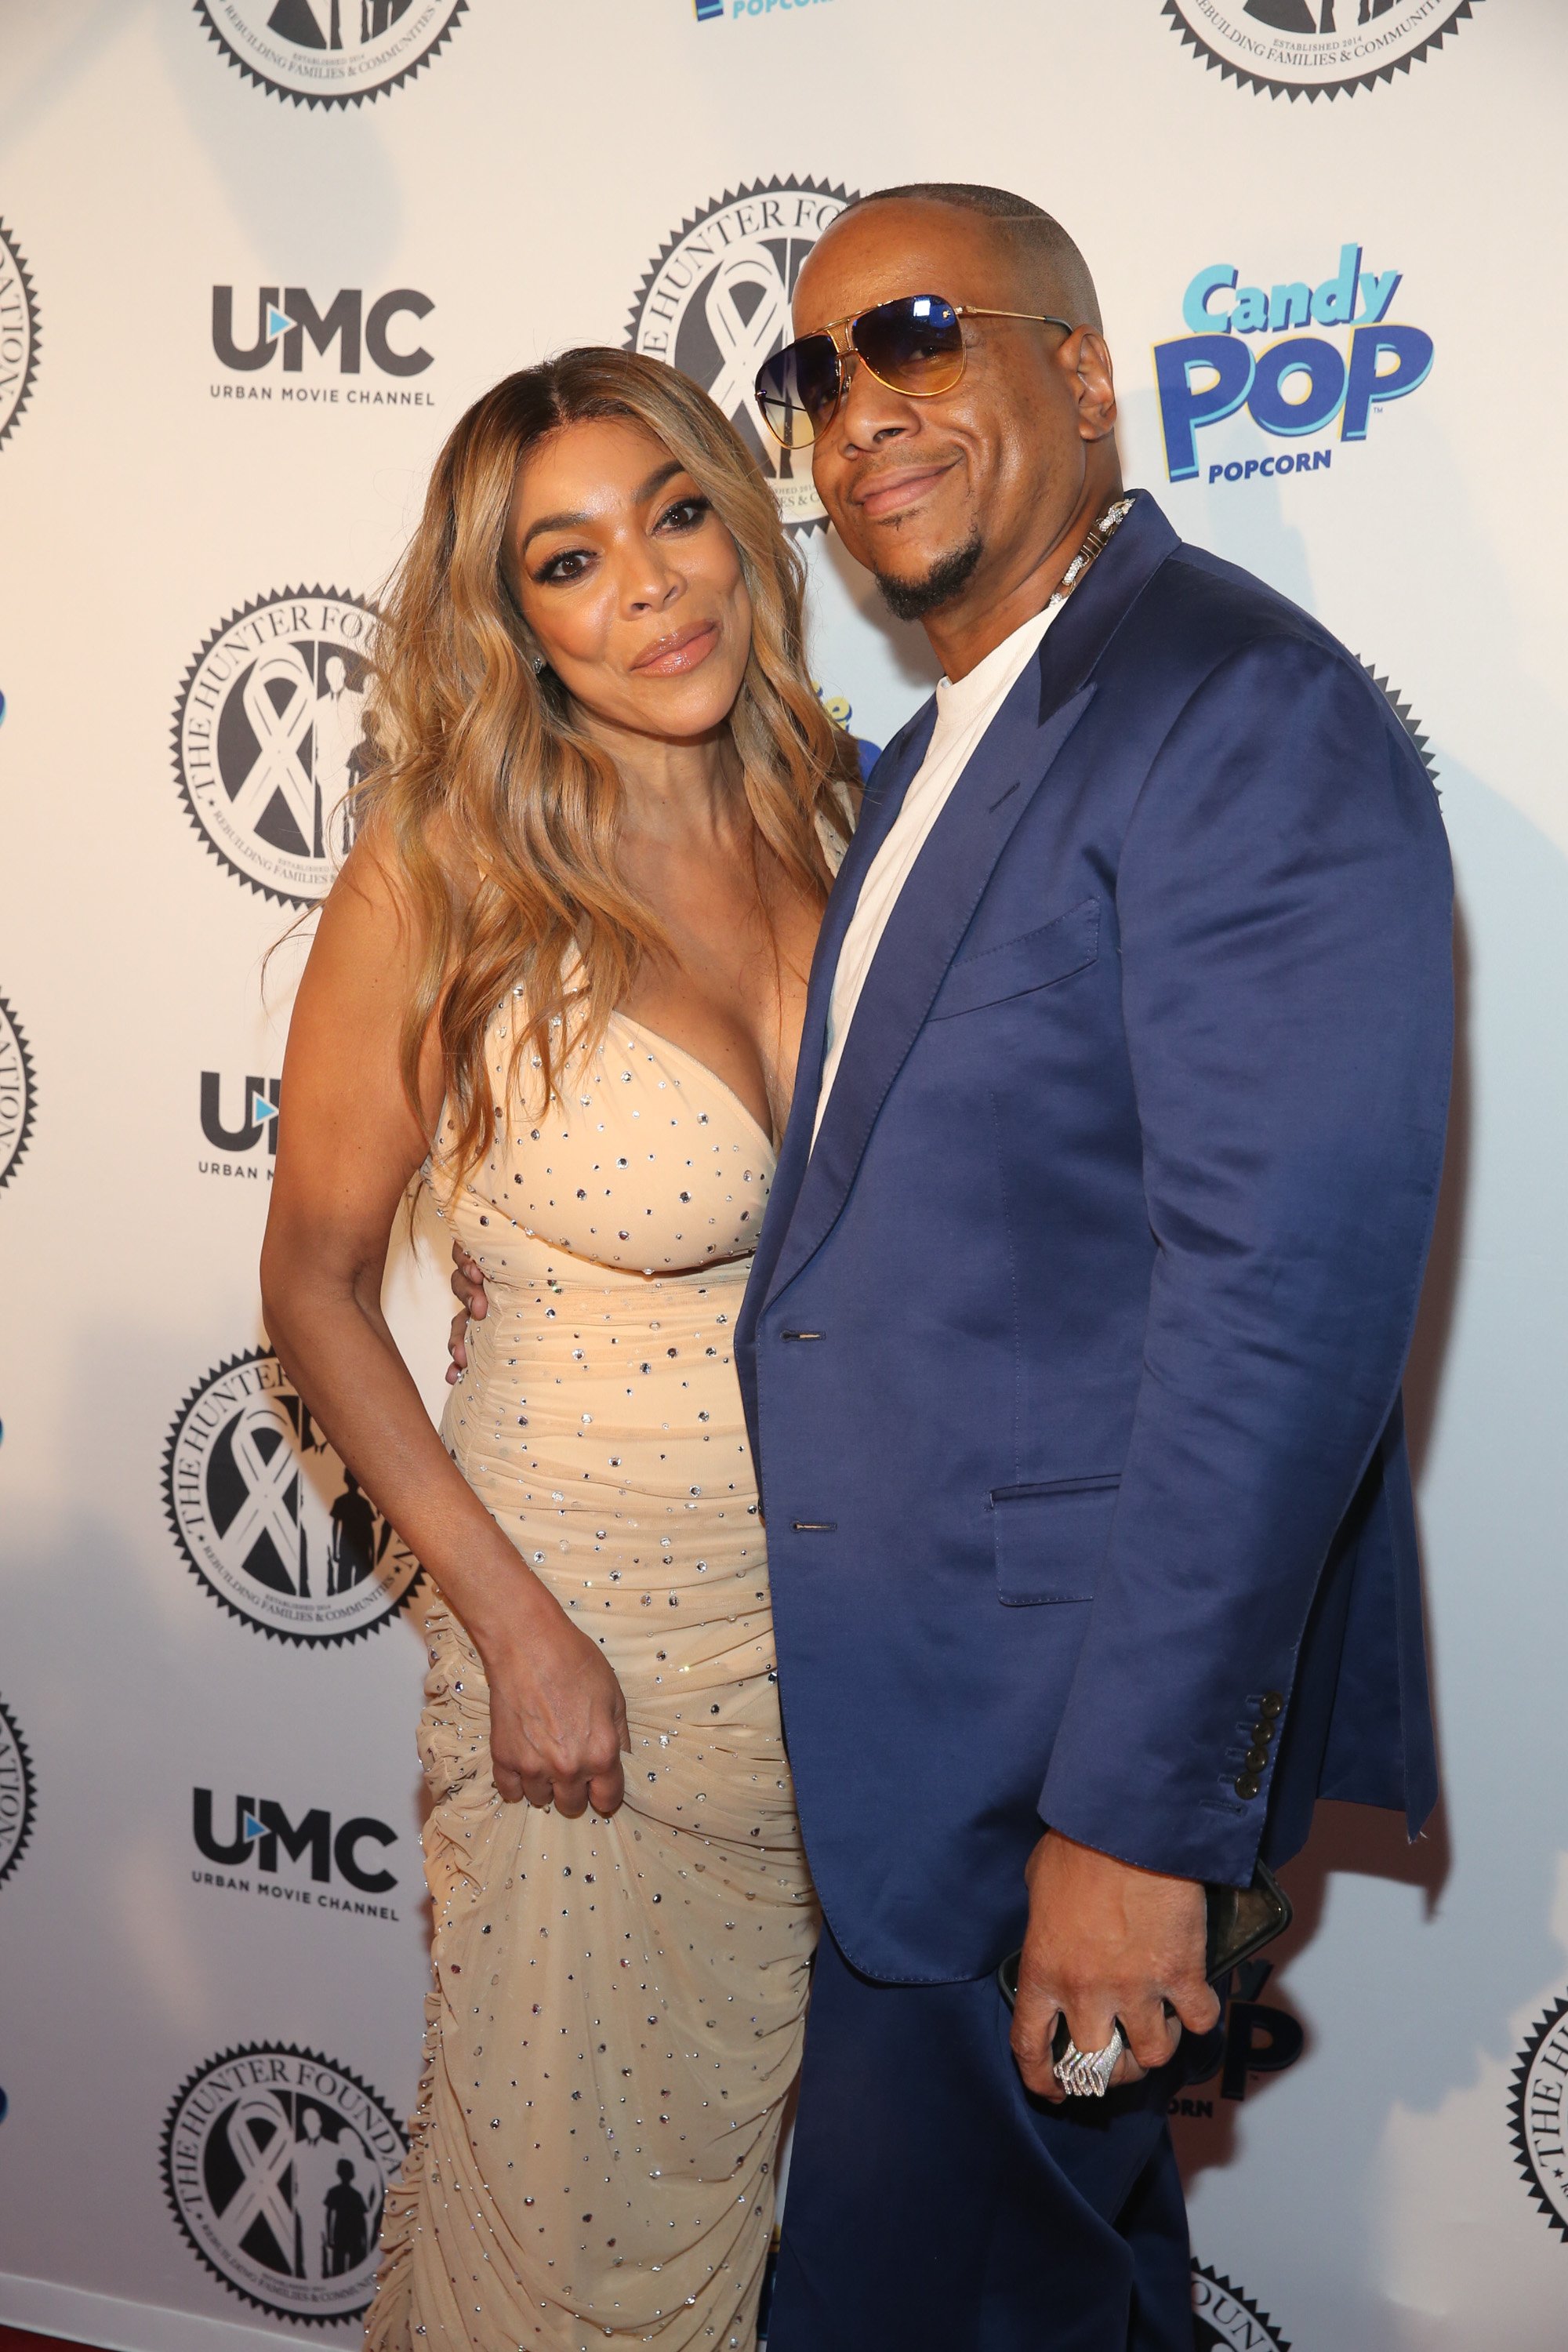 Wendy Williams and Kevin Hunter attending The Hunter Foundation gala in July 2018. | Photo: Getty Images